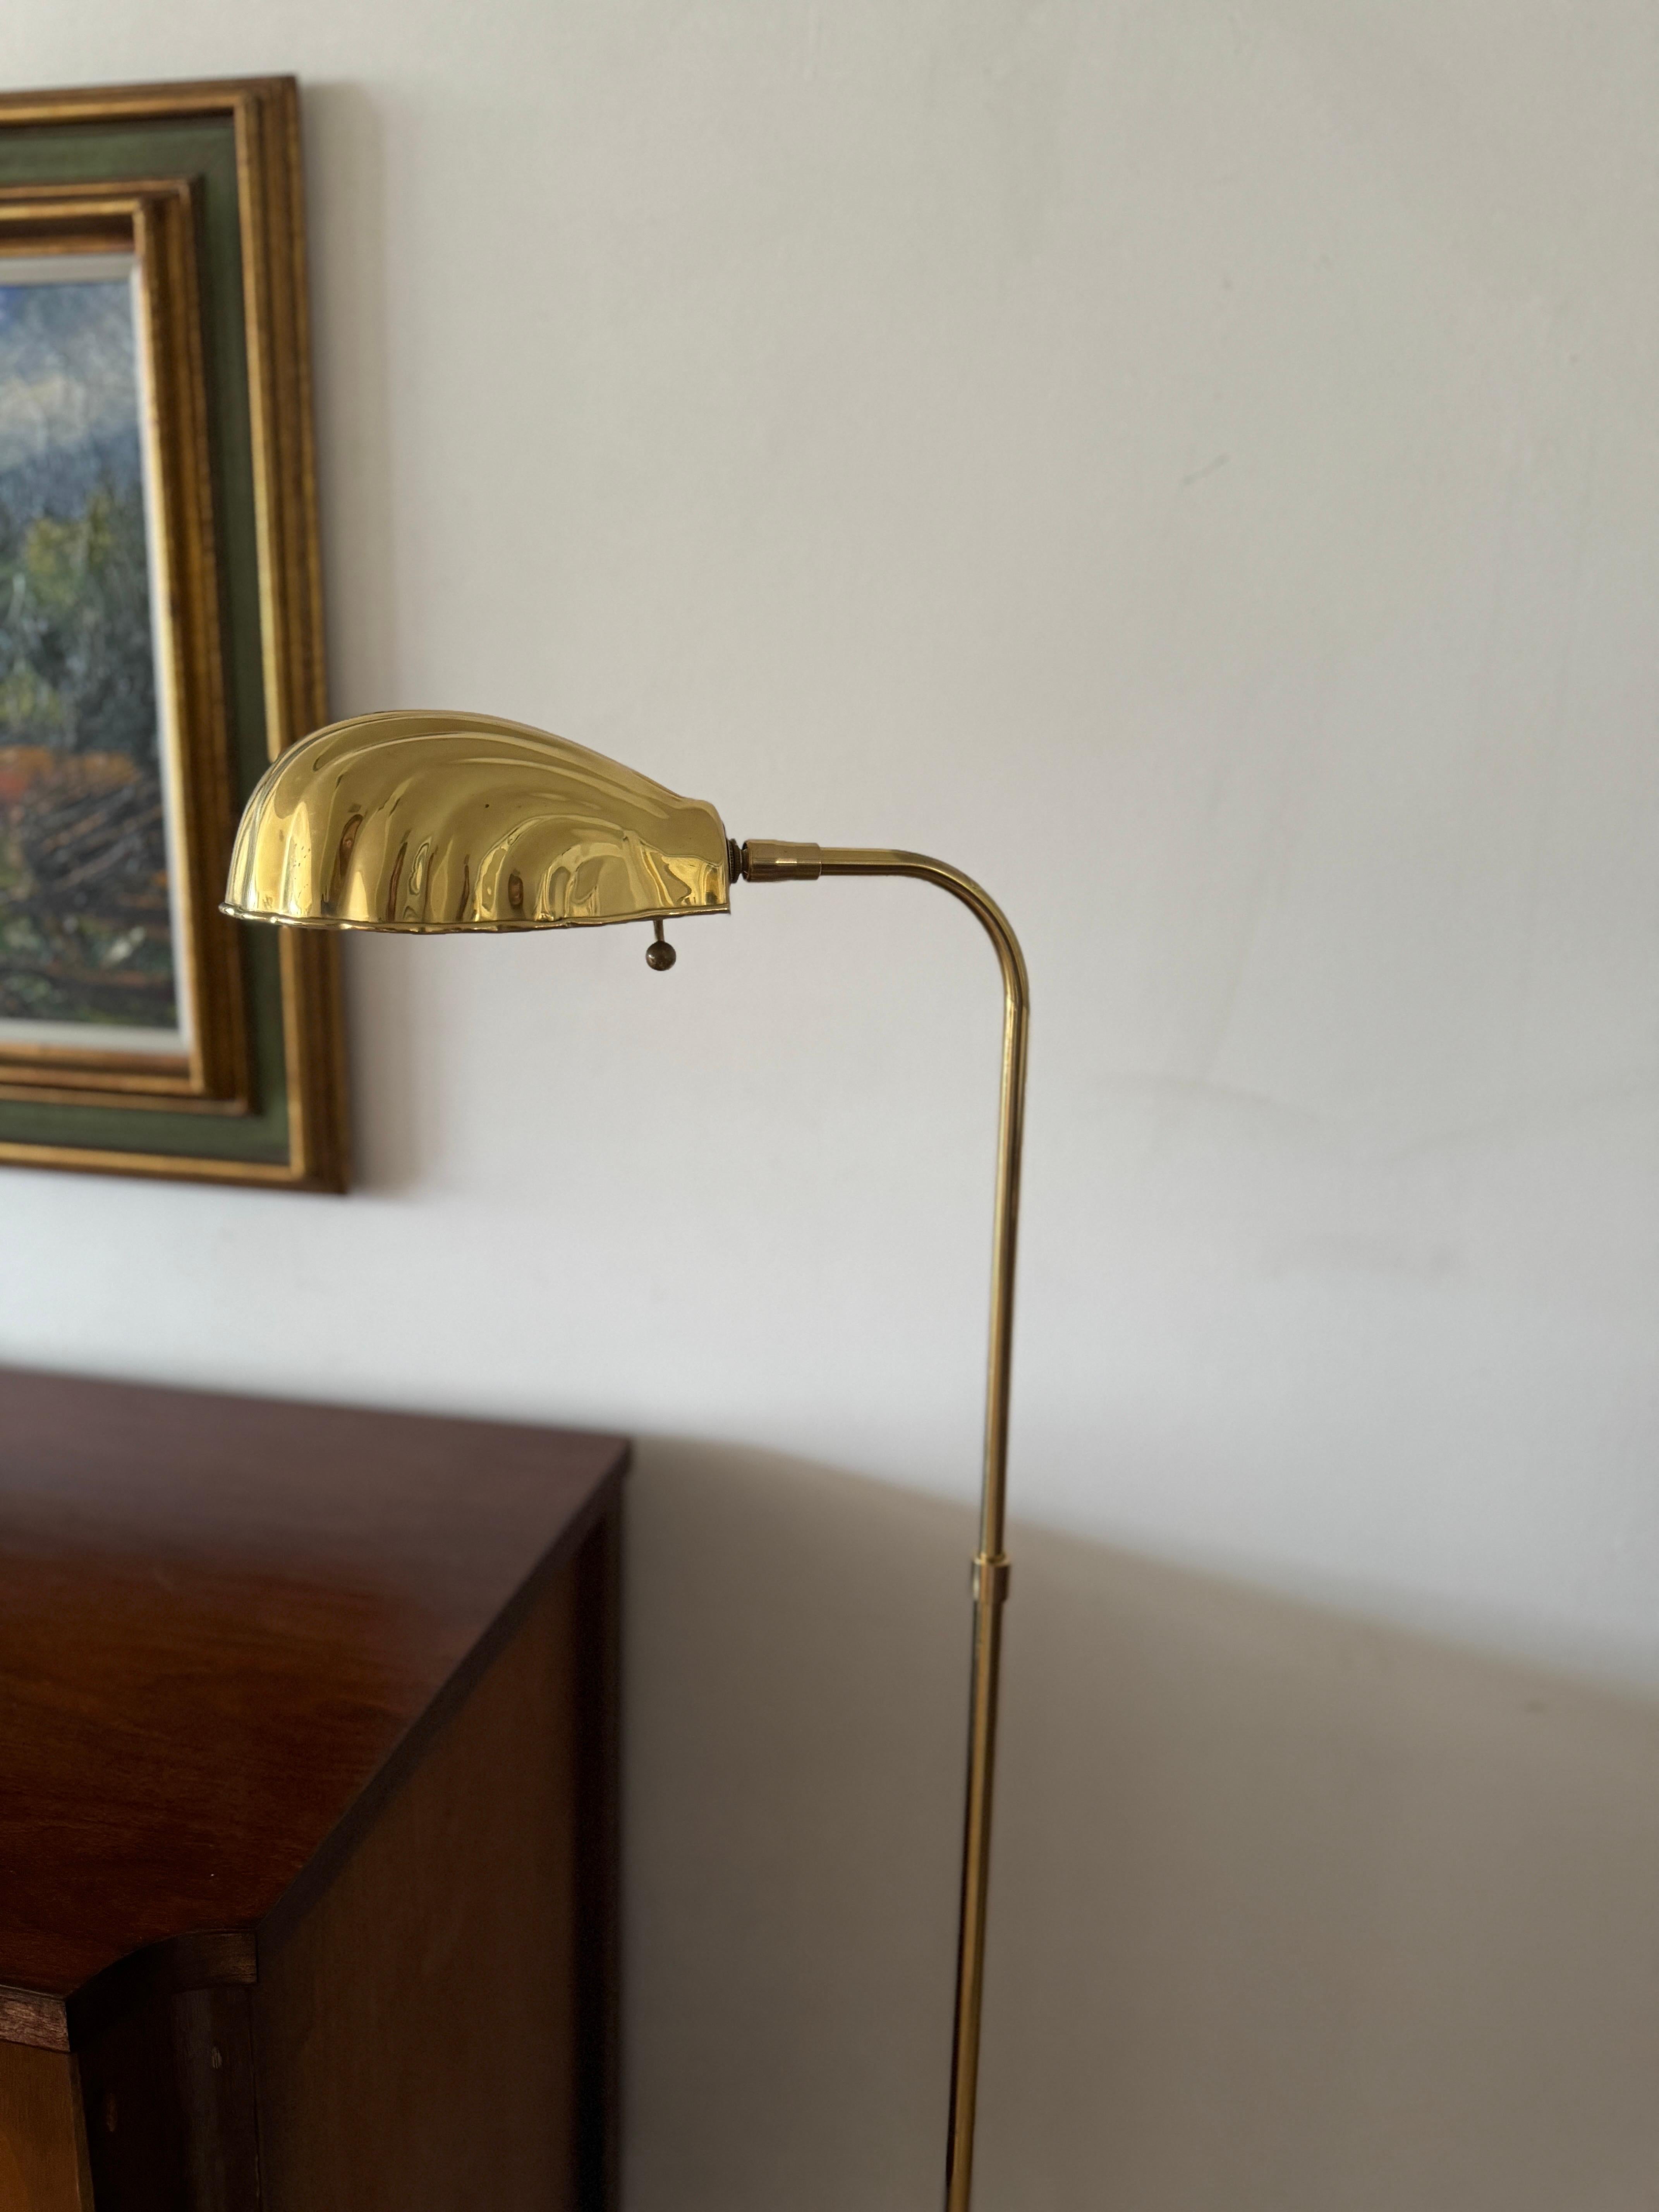 Vintage brass shell shade floor lamp with base diameter of 10 inches. Extends up to 48 inches in height.